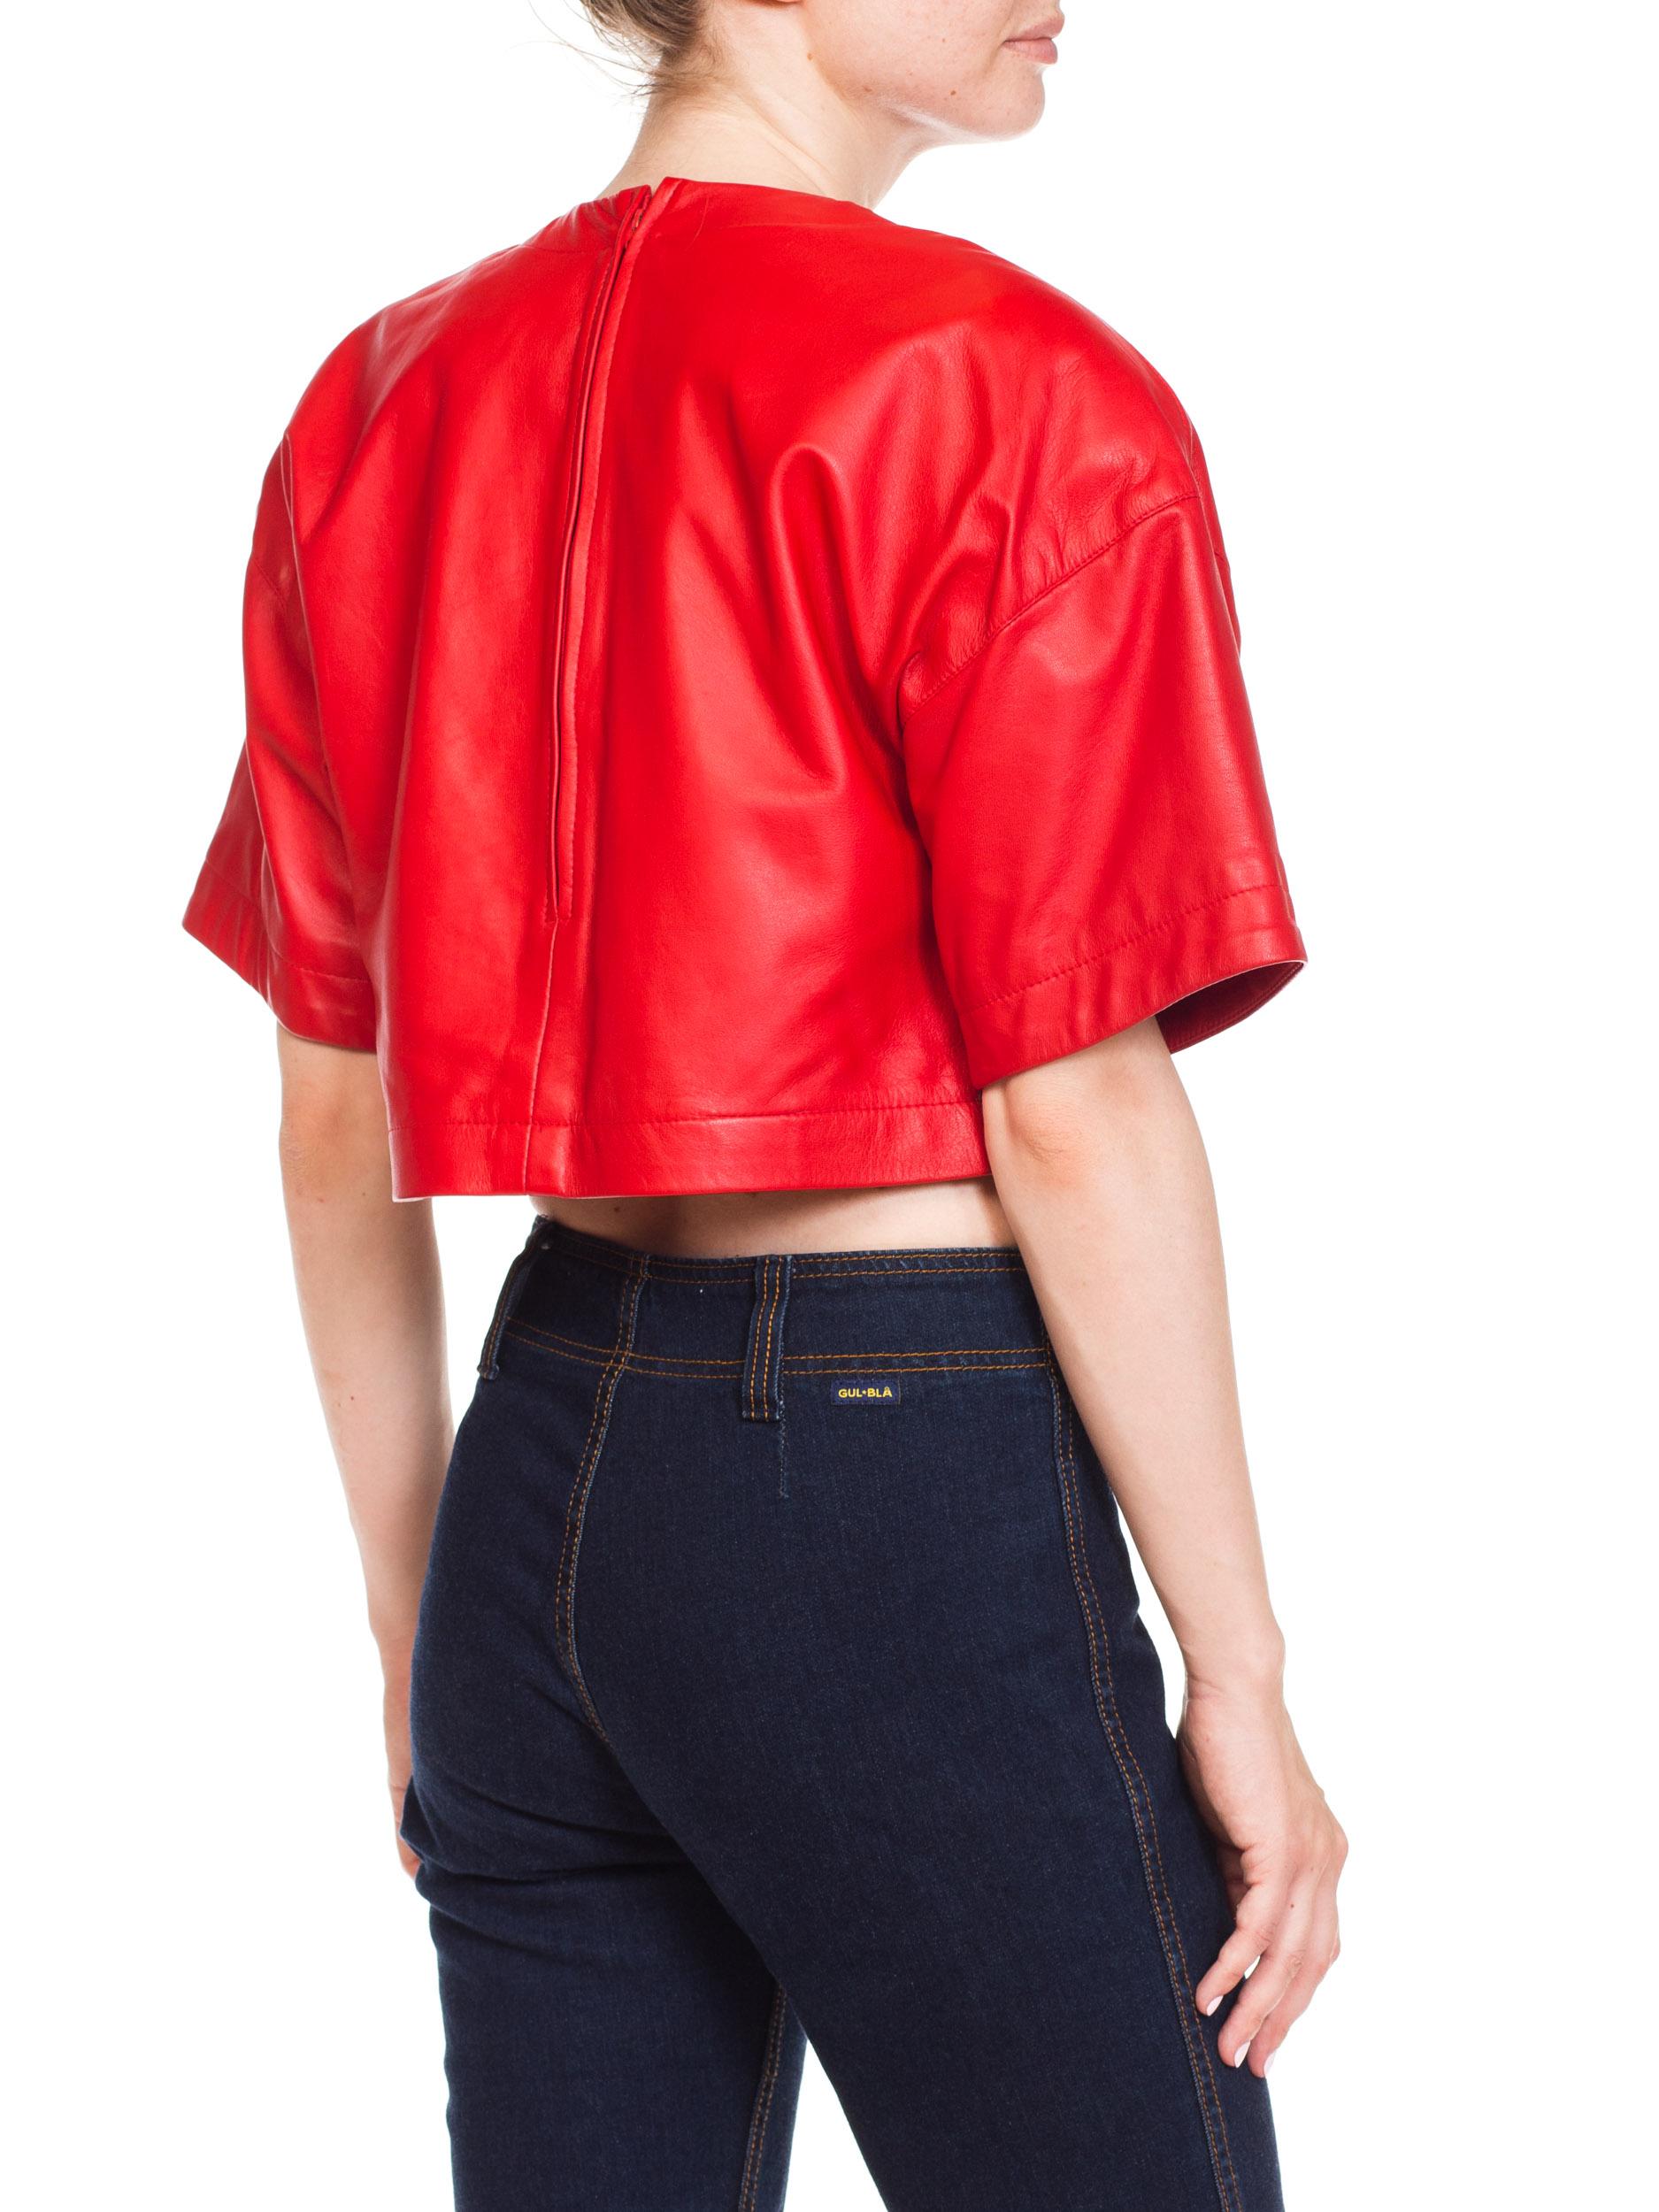 1980s Red Leather Oversized Crop Top 1